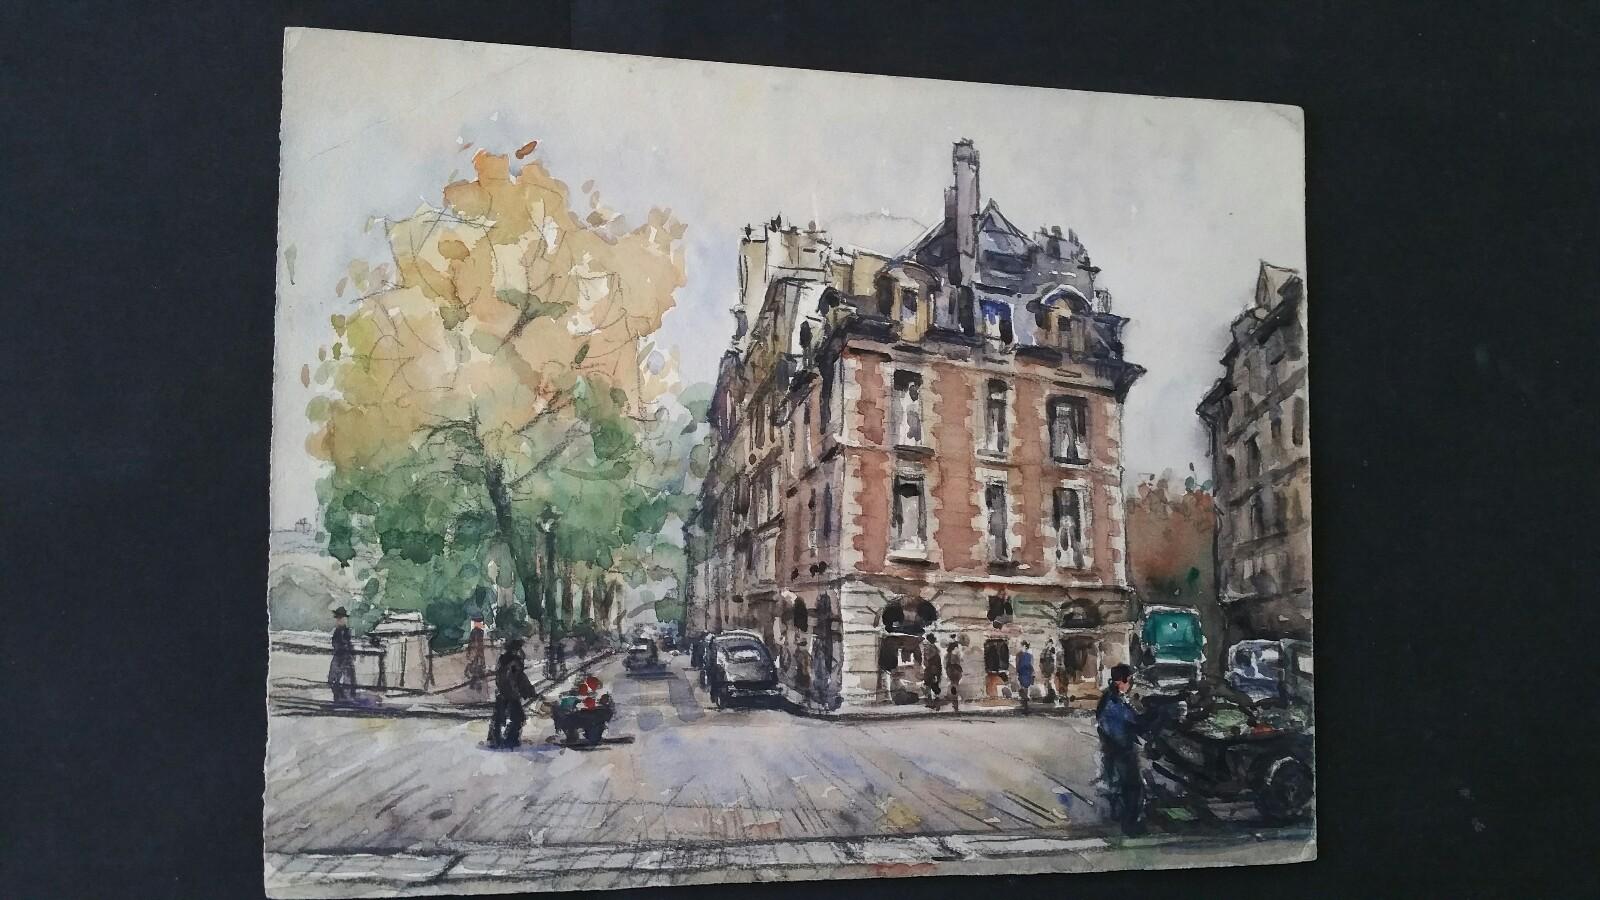 Paris, France: A City Street Scene 
by Henri Miloch (1898-1979)
unsigned 
watercolour and gouache painting on artist's paper, unframed

sheet 9.75 x 12.25  inches 

Very nicely executed study of a street scene in Paris by the highly regarded